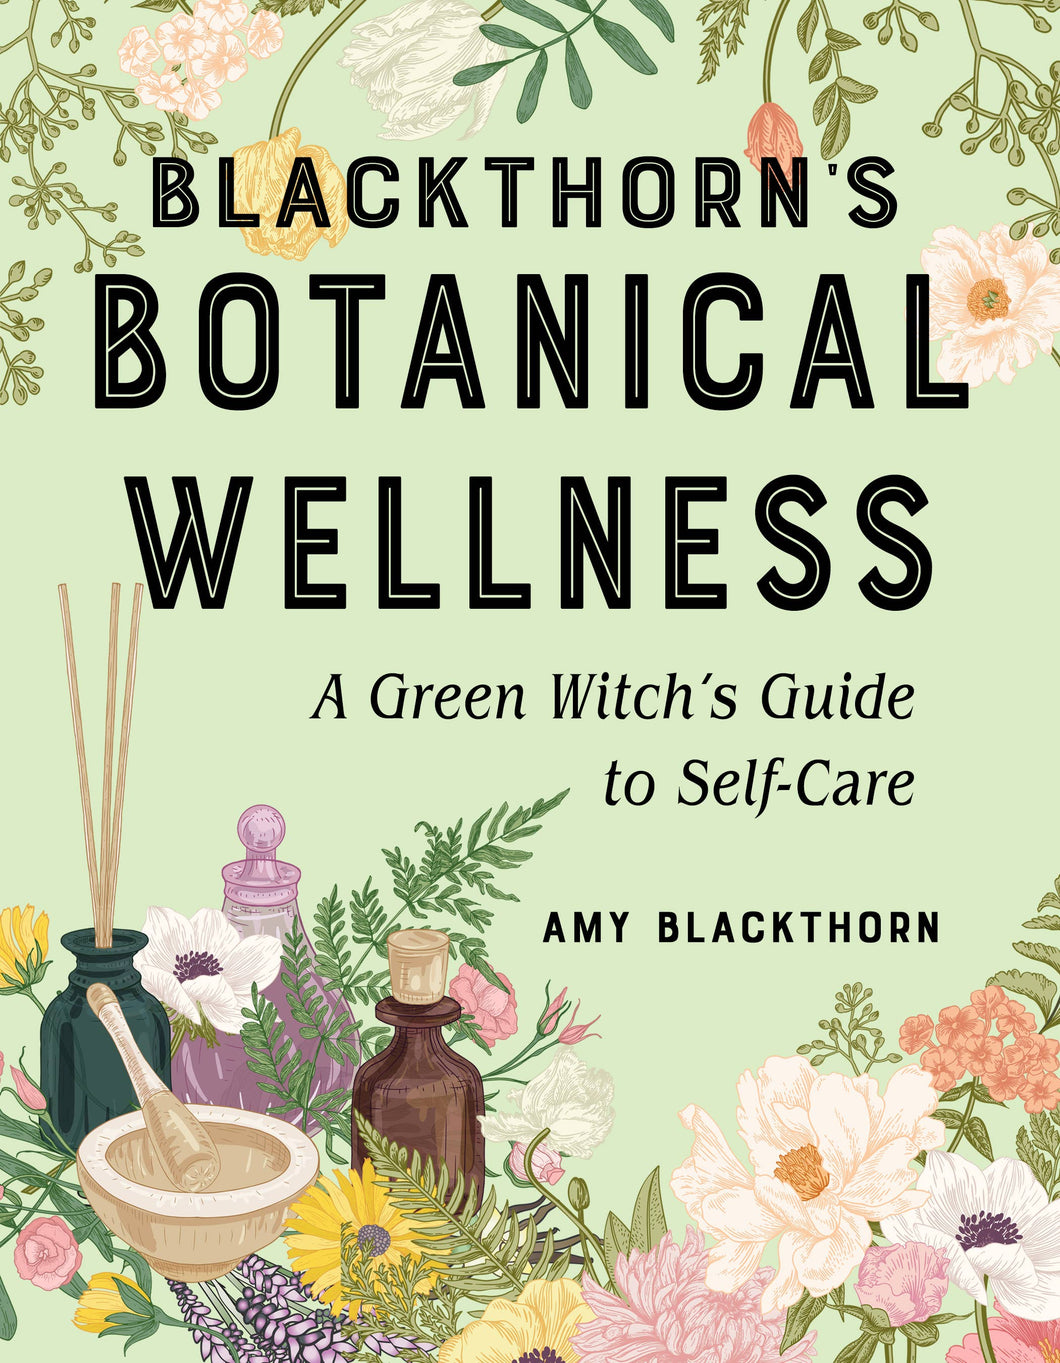 Blackthorn's Botanical Wellness: A Green Witch’s Guide to Self-Care